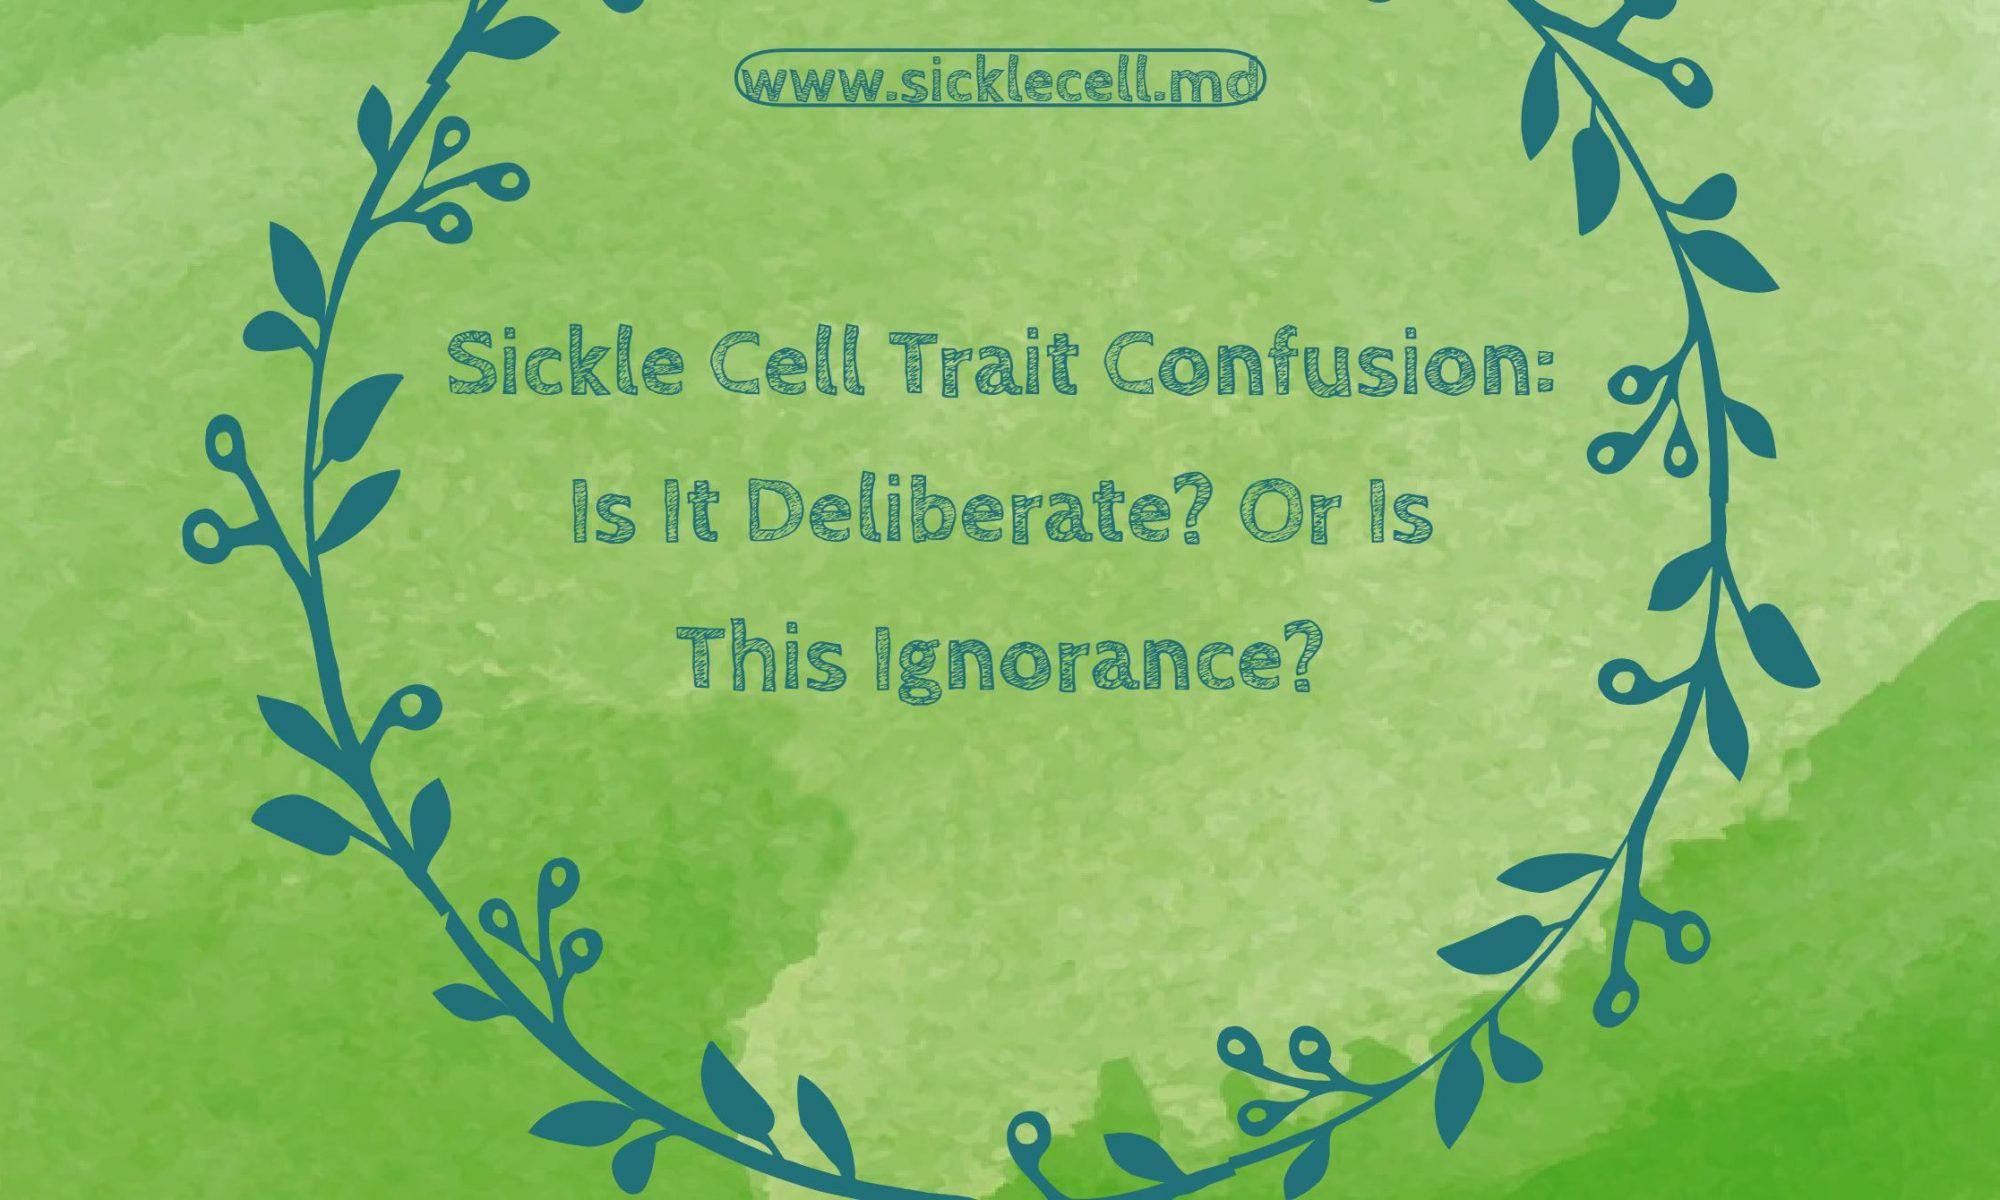 Sickle Cell Trait Confusion: Is It Deliberate? Or Is This Ignorance?